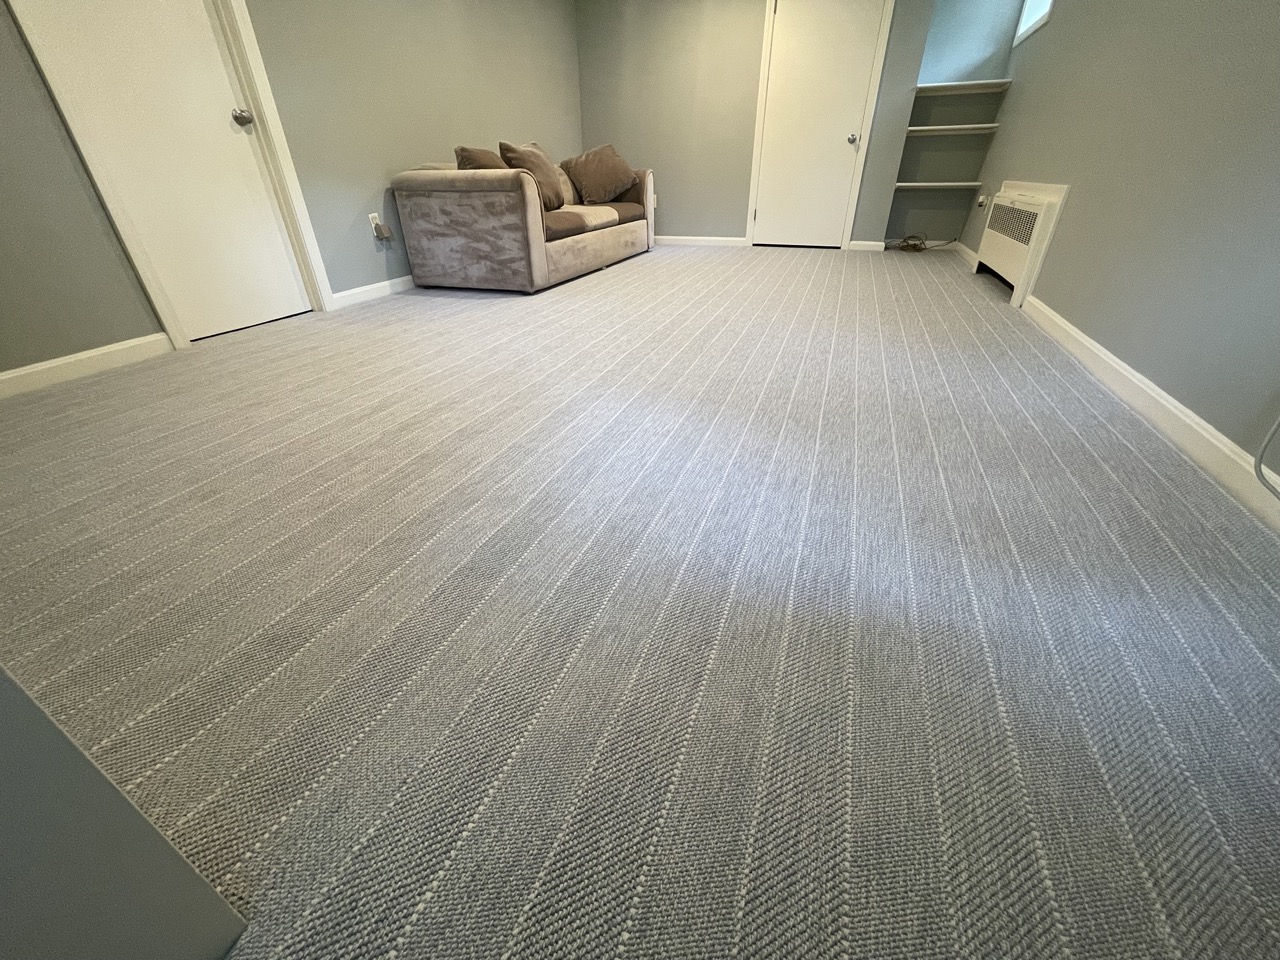 A room receives a flooring makeover with its new wall-to-wall carpet flooring.